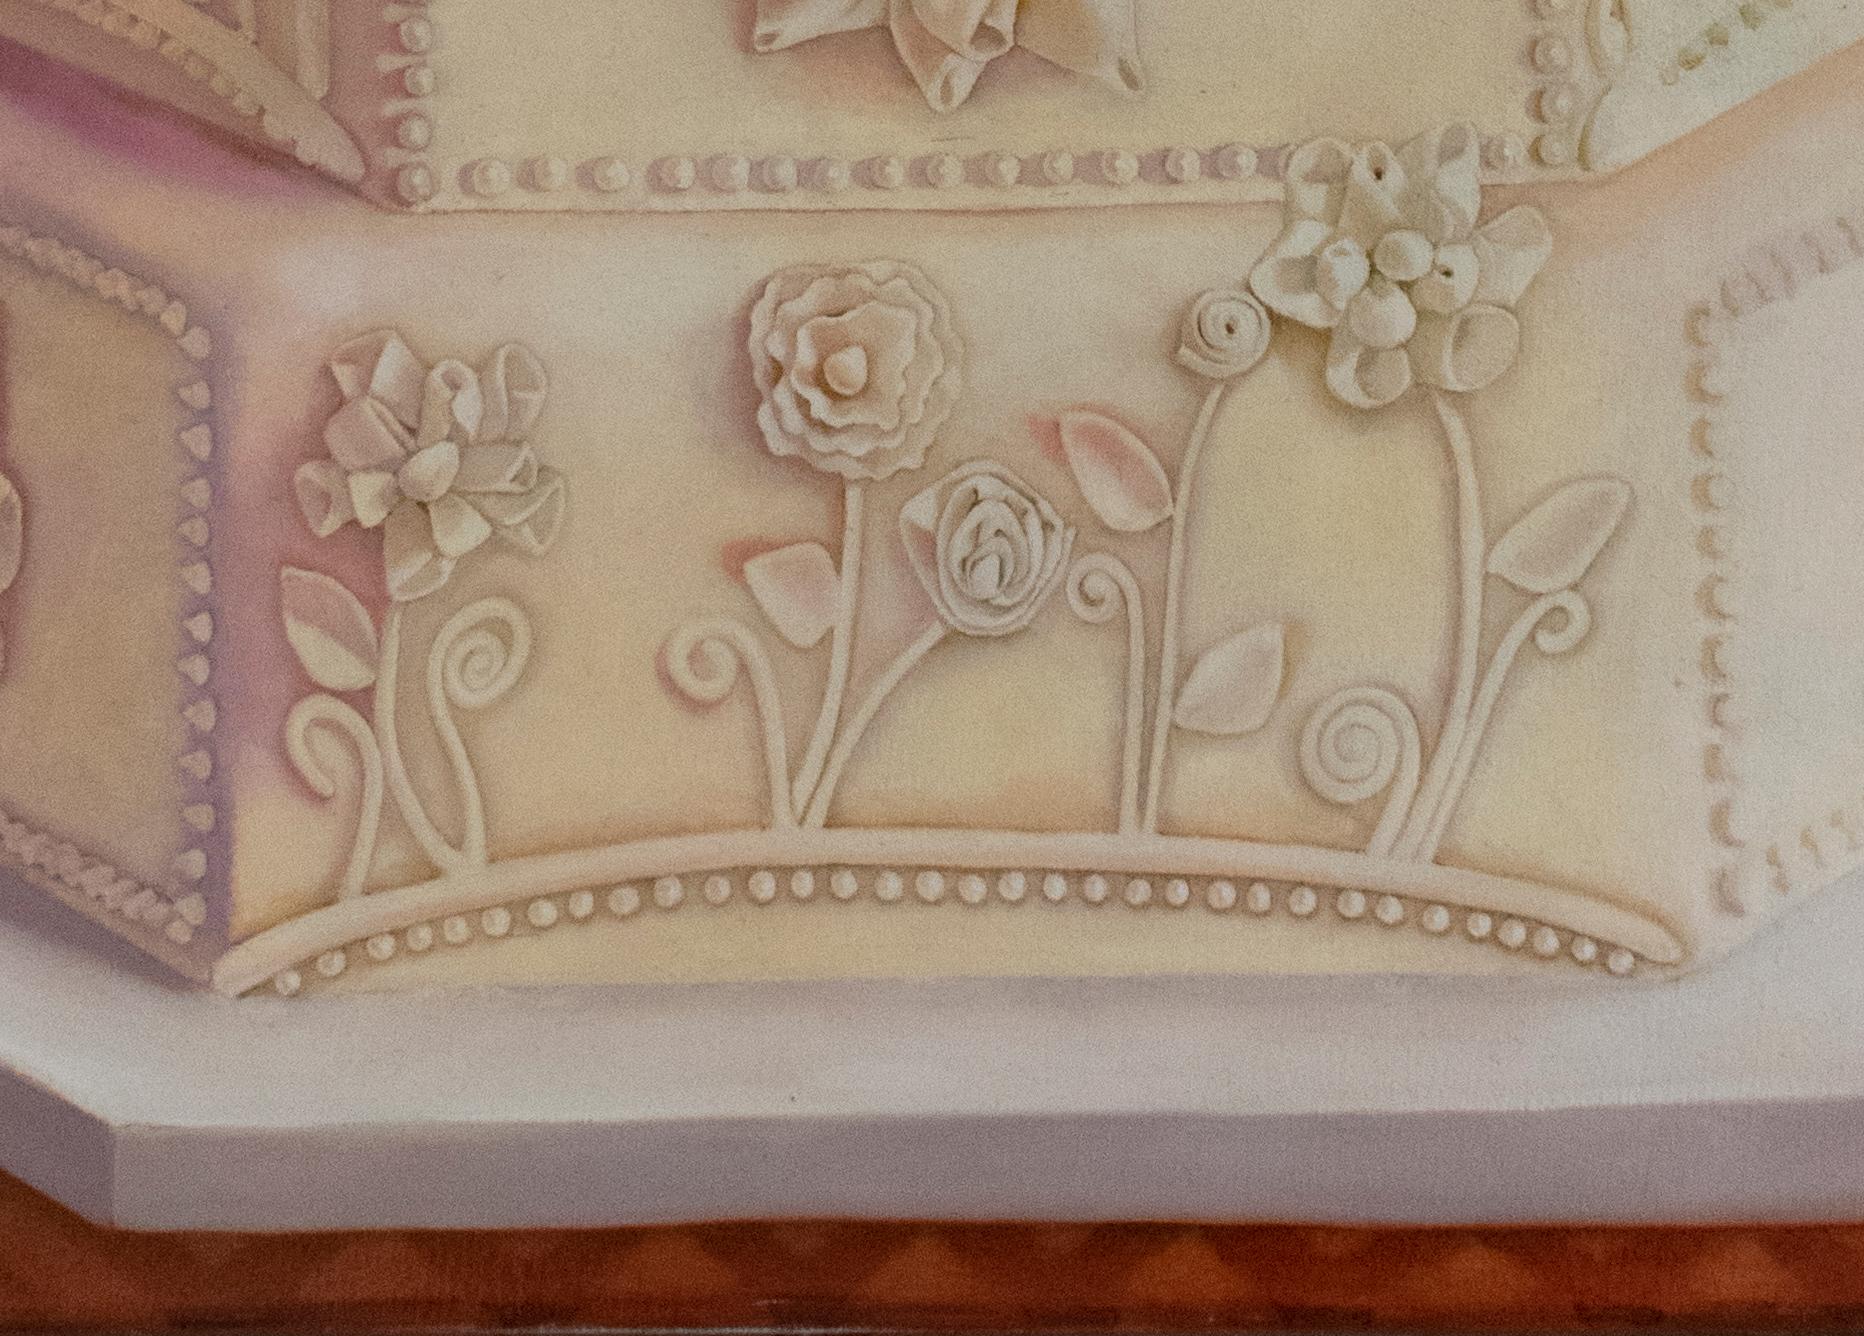 Wedding Cake (Realist oil Painting of Multi Tiered Iced Cake) - Brown Figurative Painting by Eileen Murphy